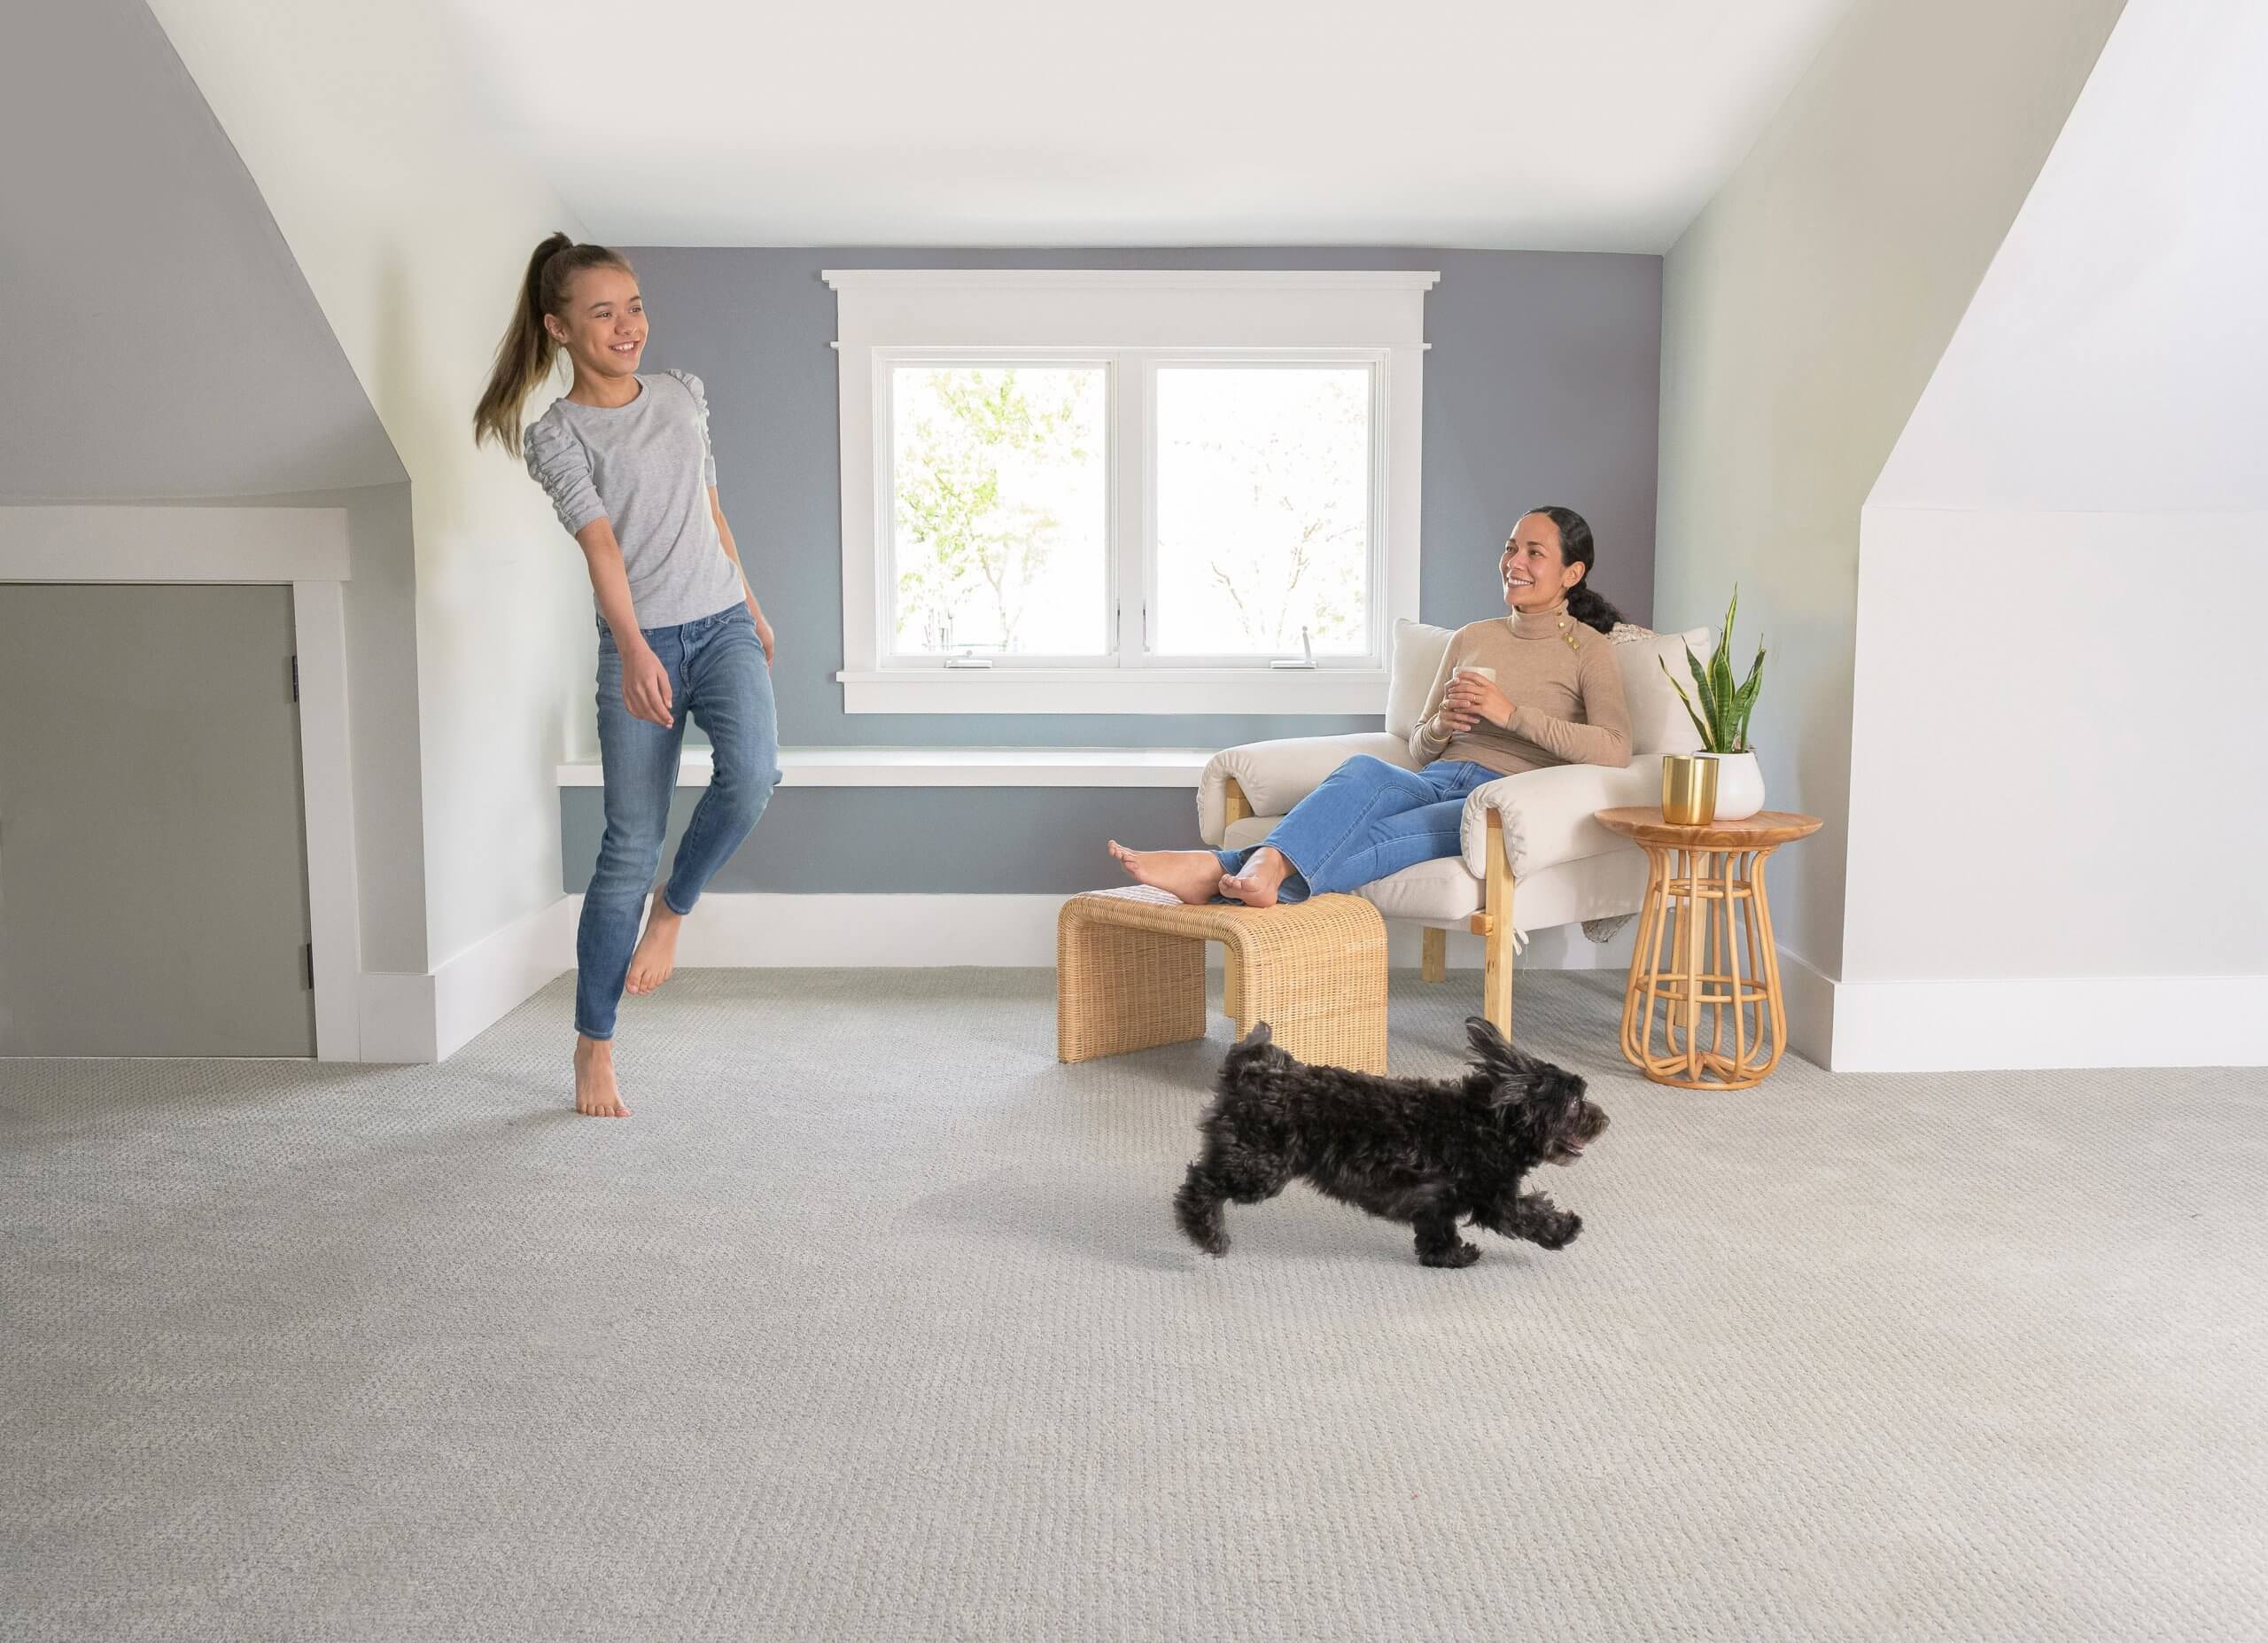 benefits of professional carpet cleaning before moving into a new home